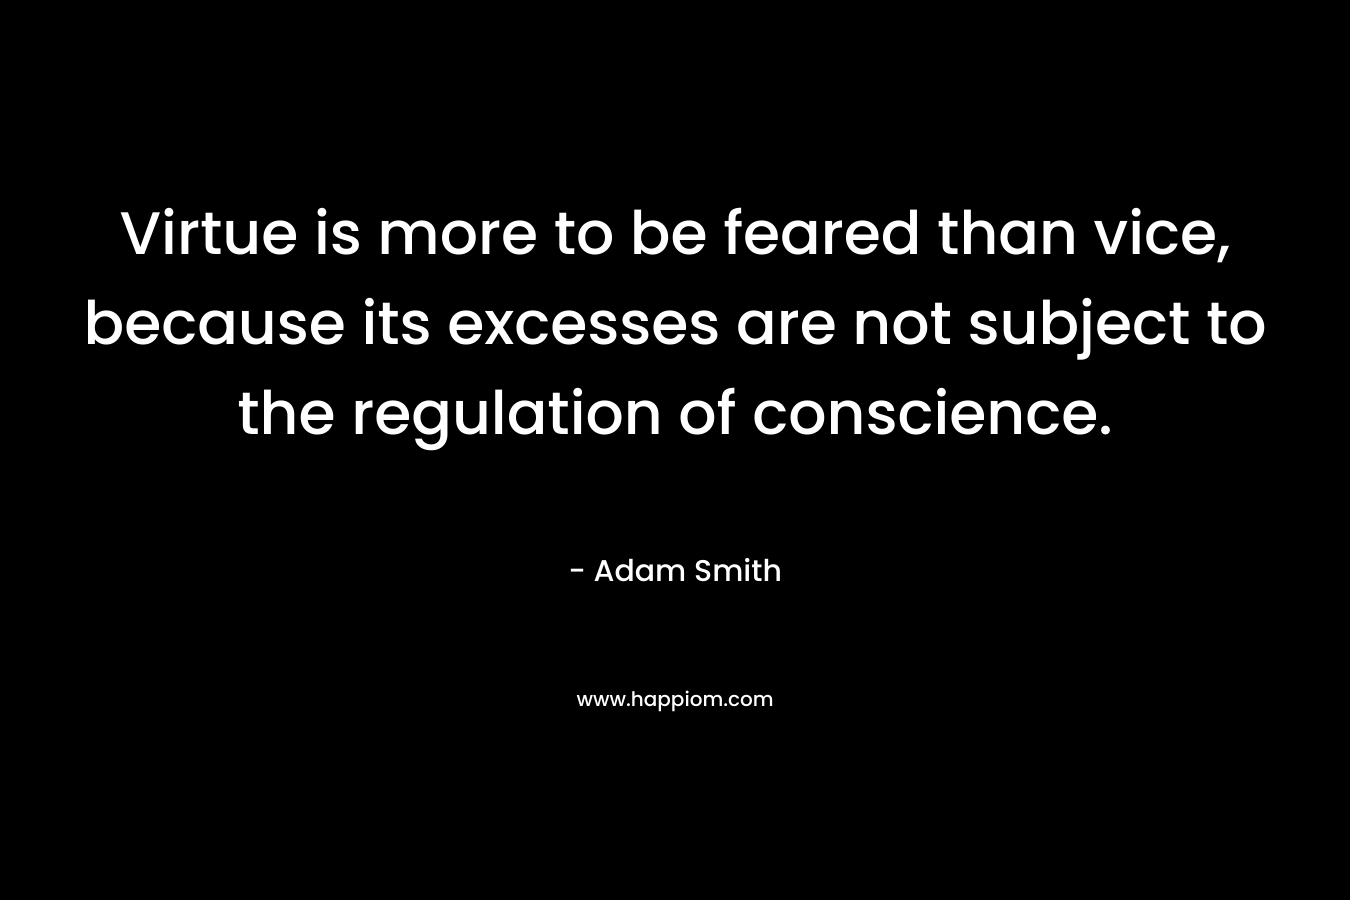 Virtue is more to be feared than vice, because its excesses are not subject to the regulation of conscience. – Adam Smith